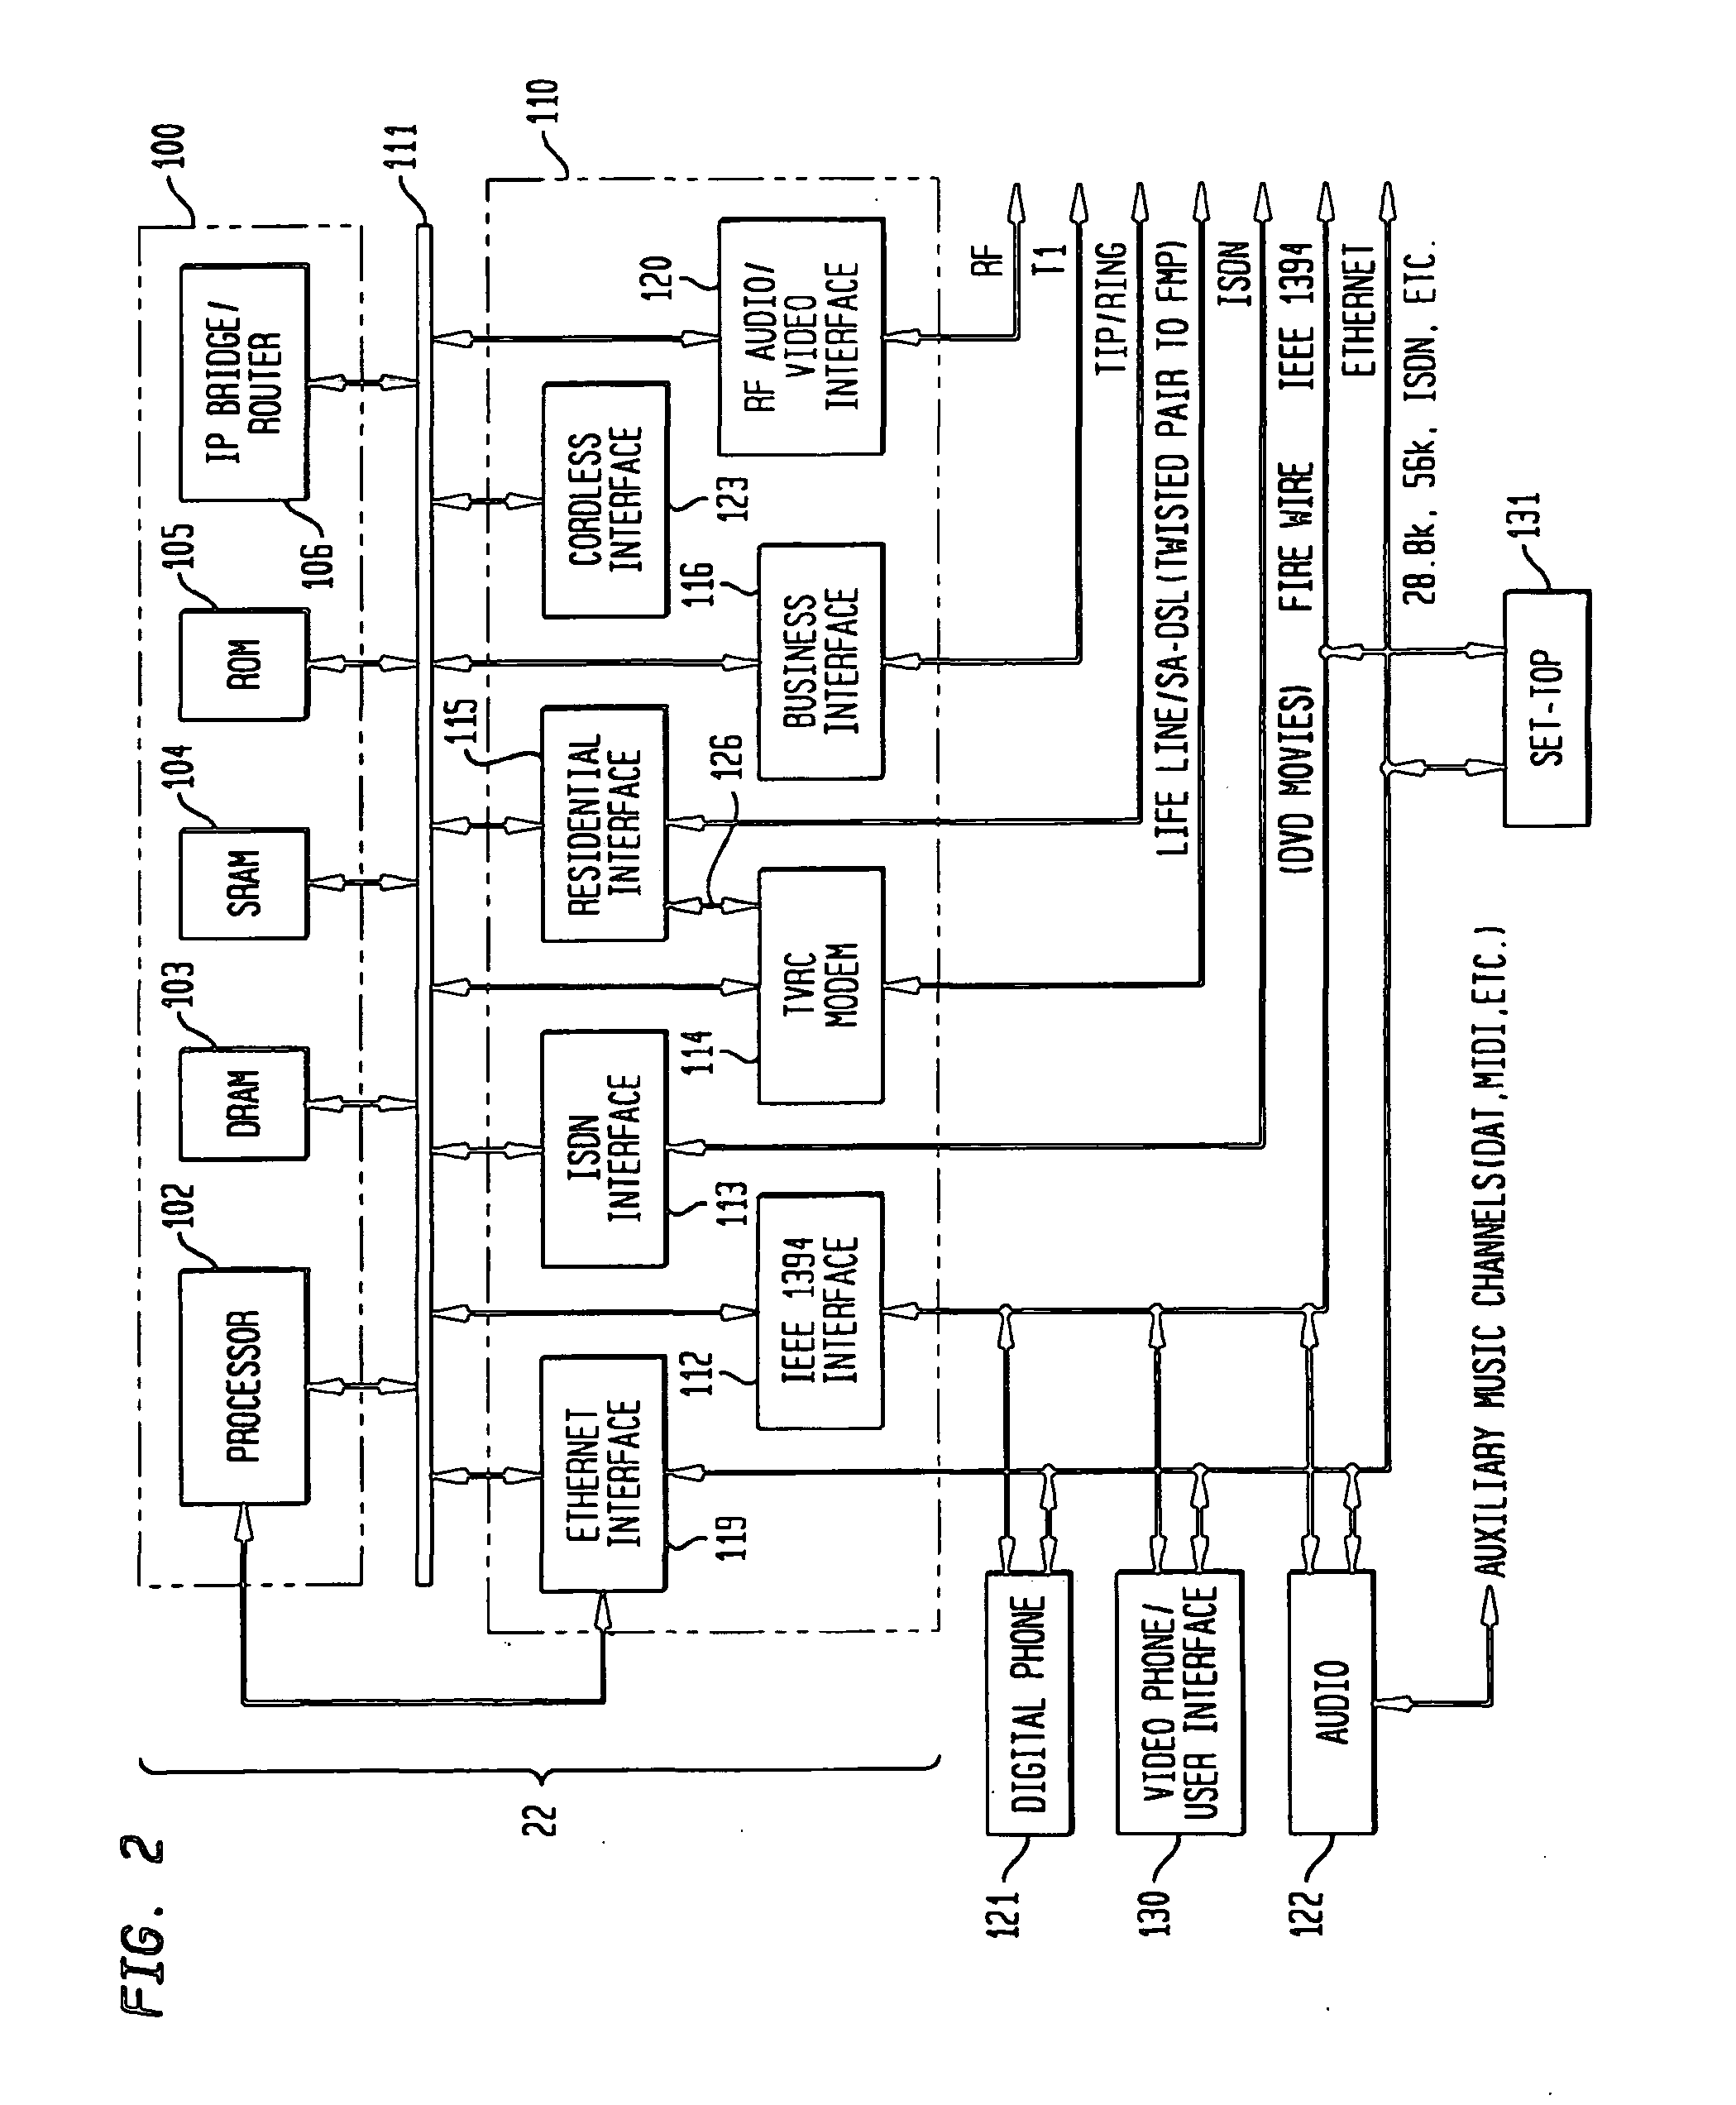 Multifunction interface facility connecting wideband multiple access subscriber loops with various networks